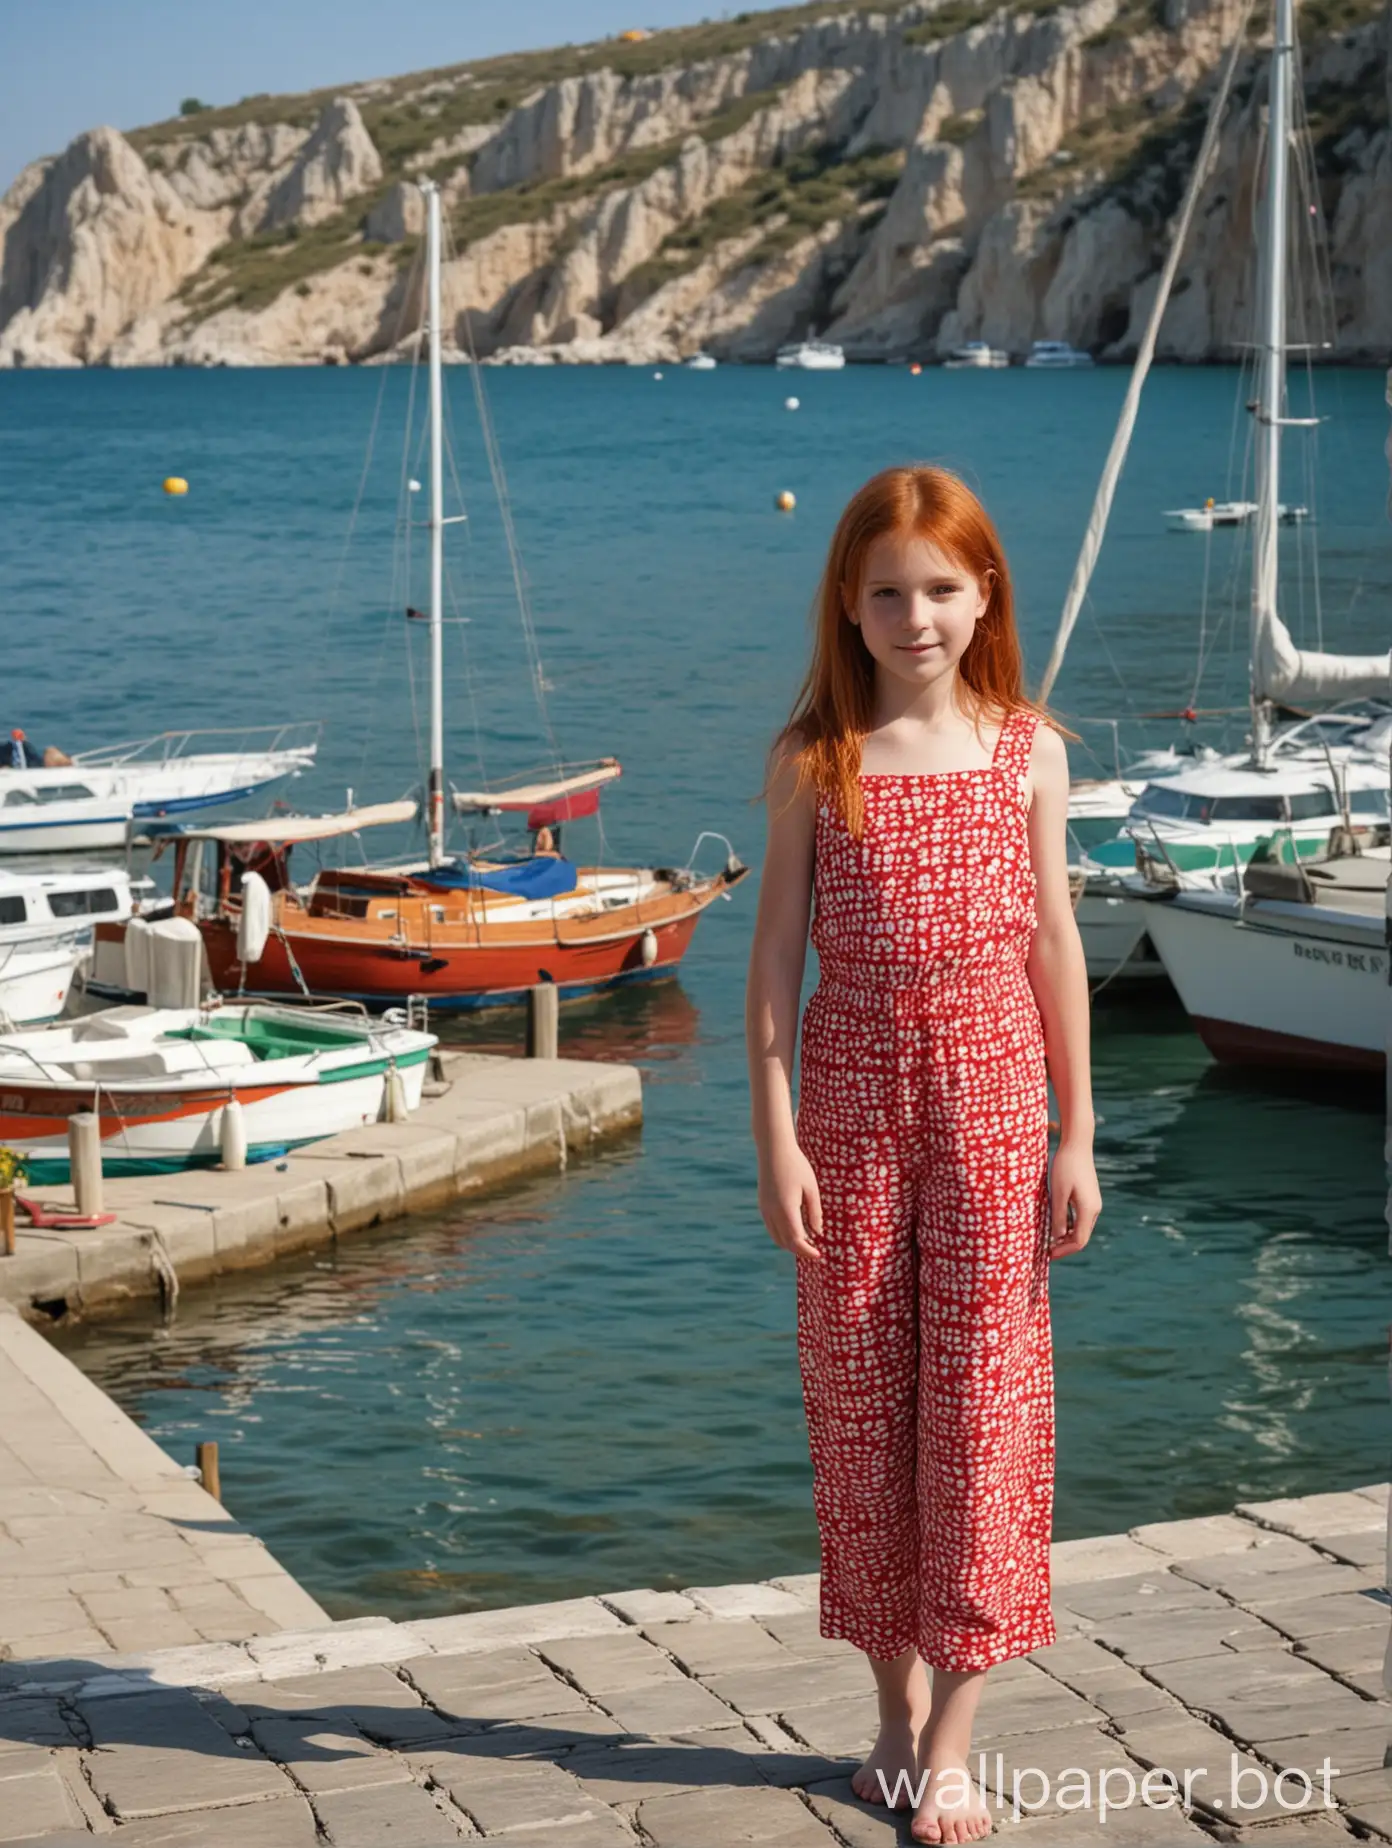 Scenic-Waterfront-View-with-RedHaired-Girl-in-Jumpsuit-by-Boats-and-Yachts